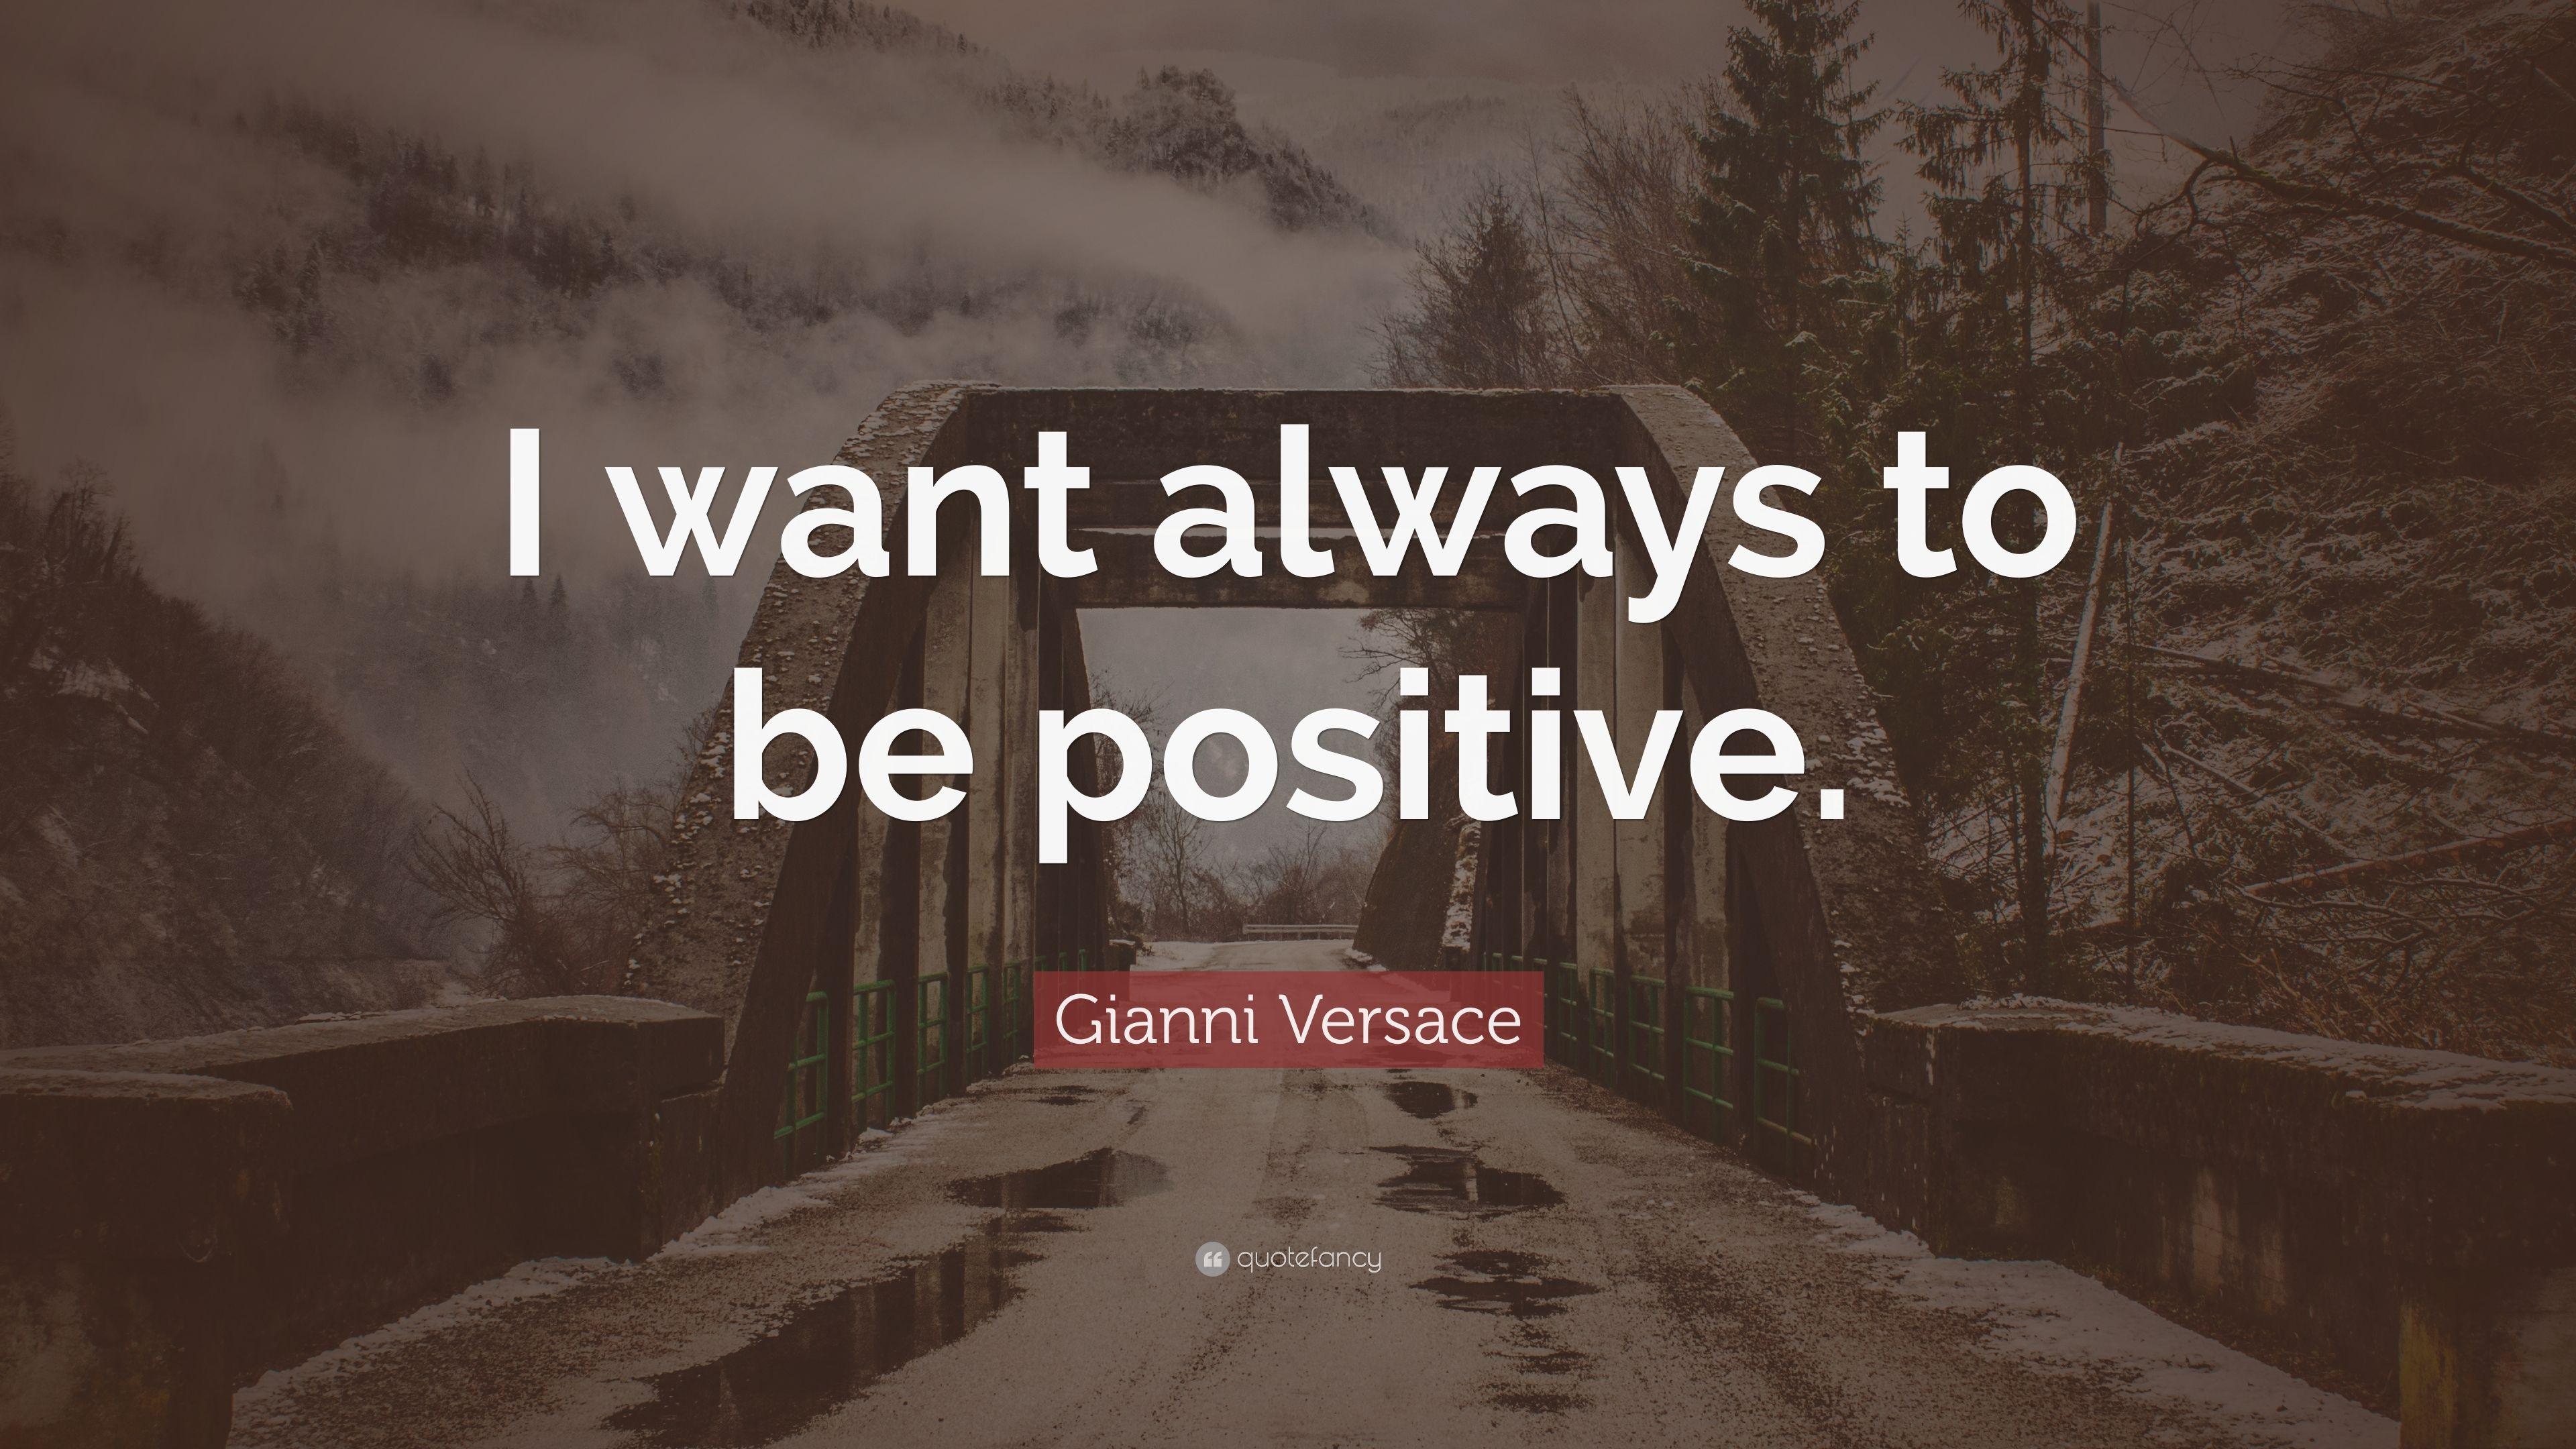 Gianni Versace Quote: “I want always to be positive.” 7